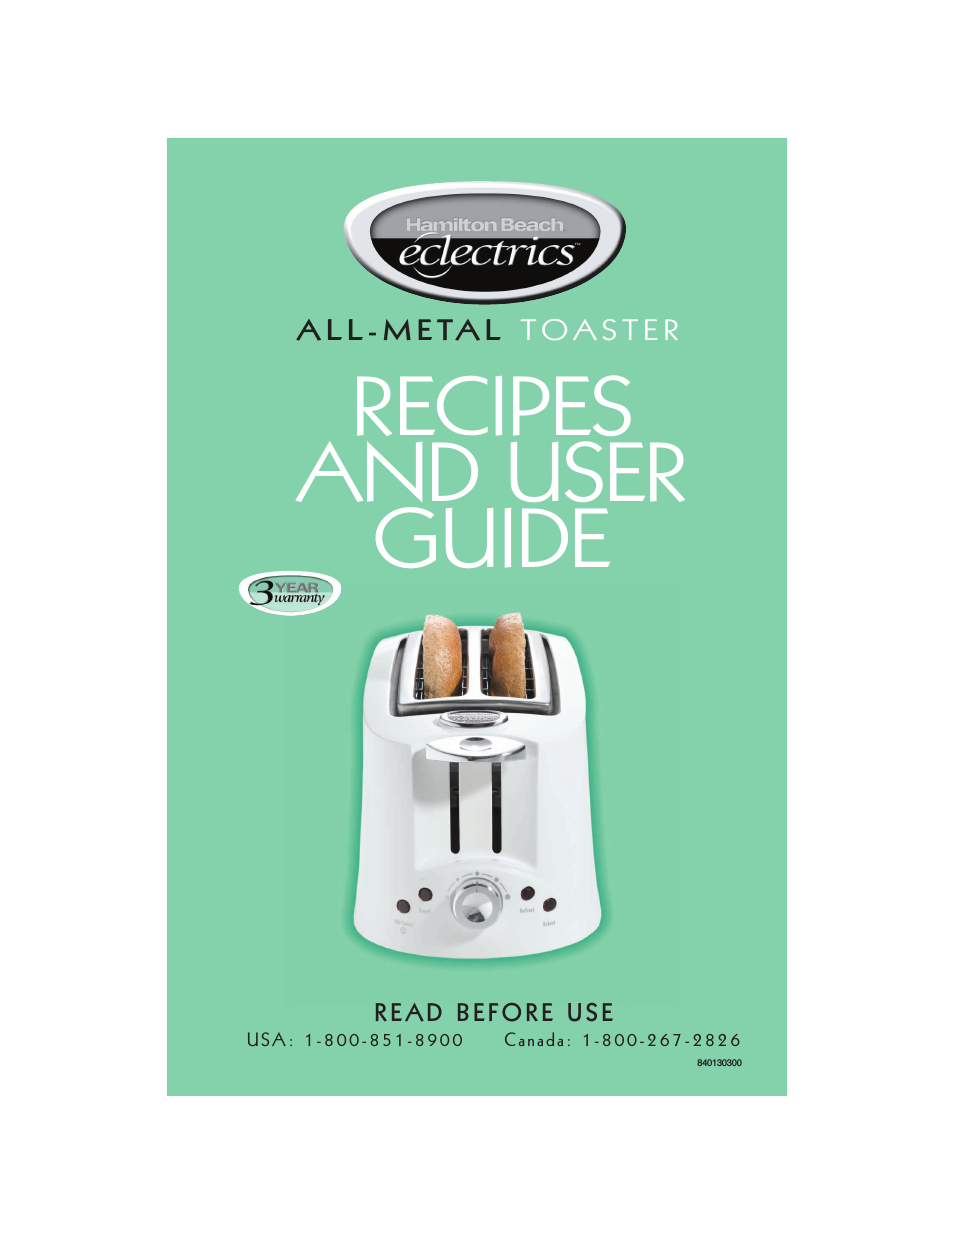 All-Metal Toaster